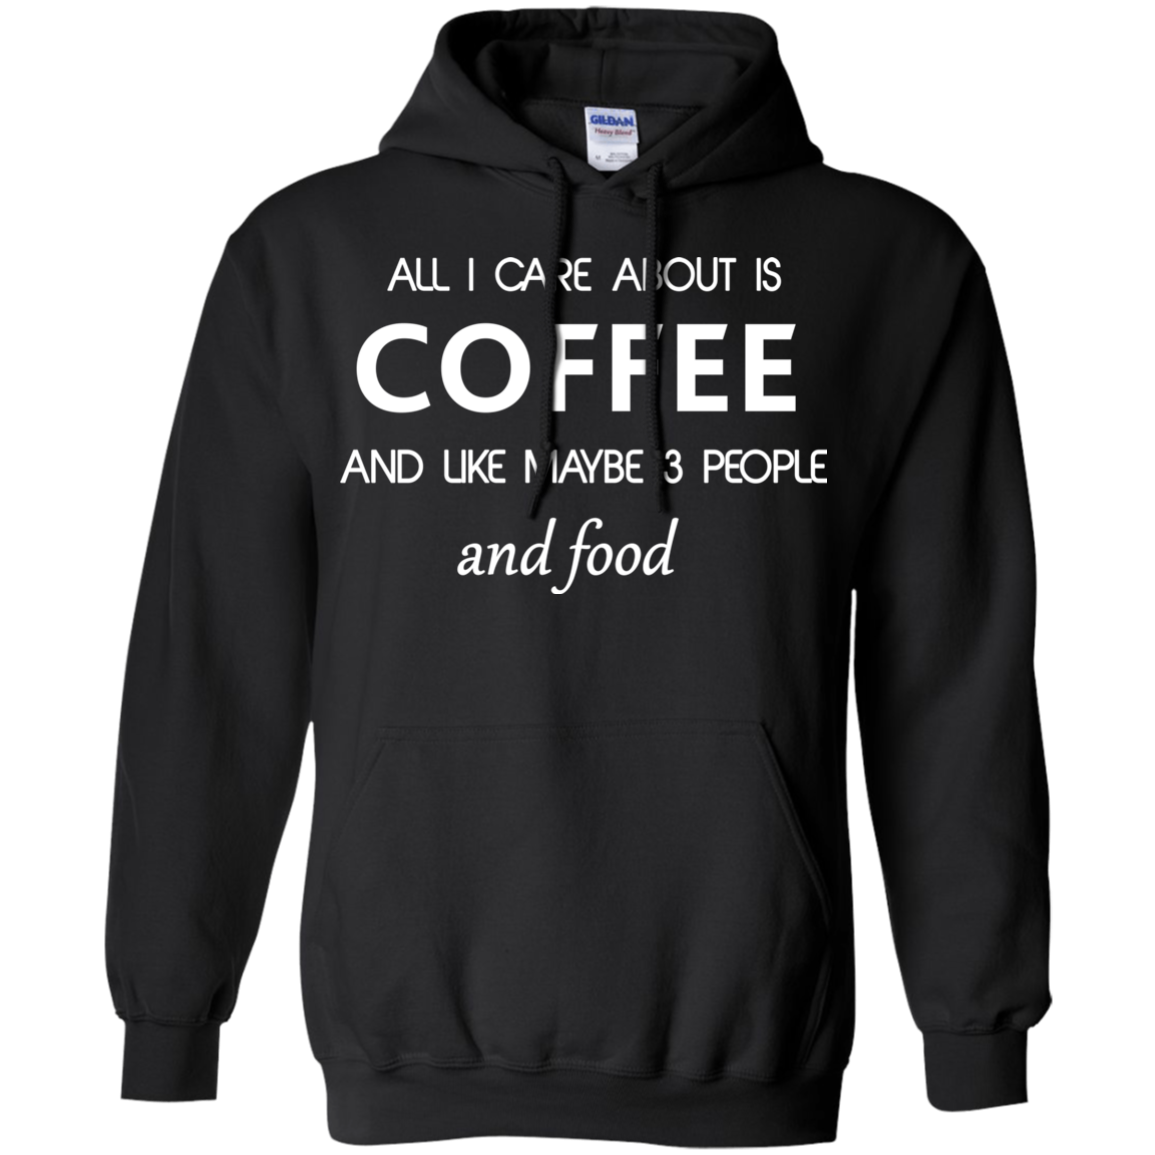 All I care about is Coffee Shirt, Hoodie